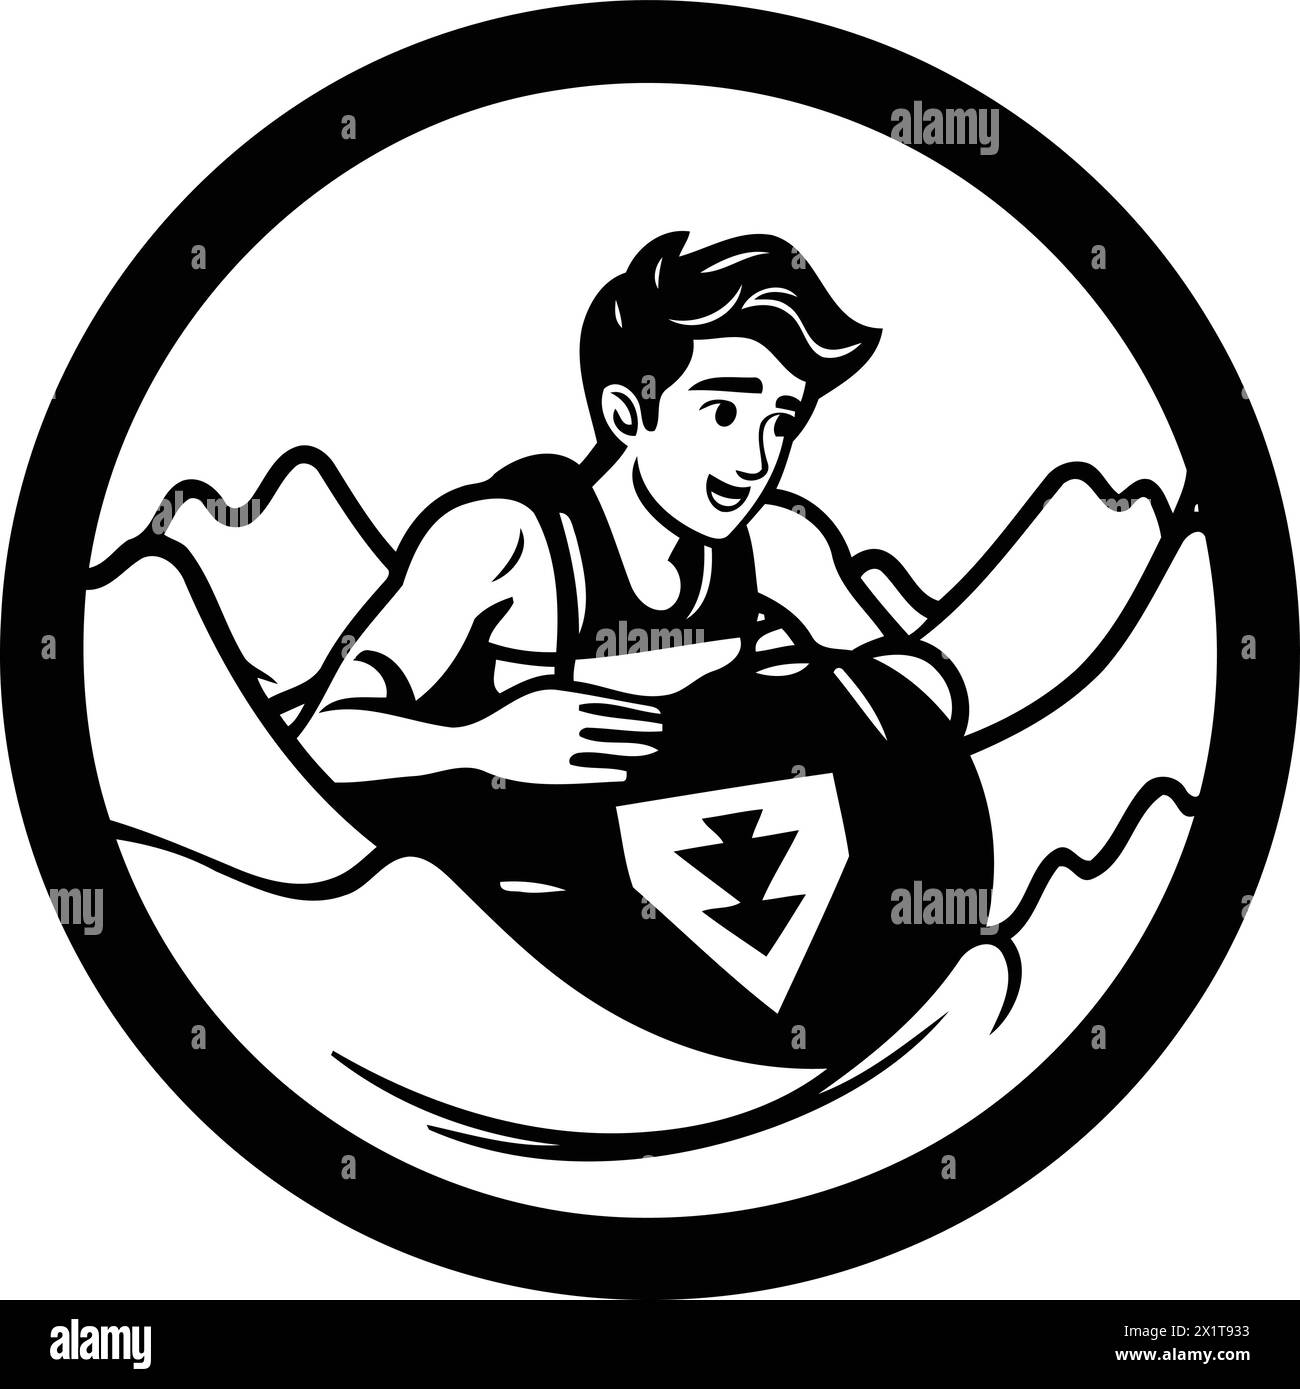 Illustration of a man surfing on a surfboard holding a cup of coffee viewed from the side set inside circle on isolated background done in retro style Stock Vector